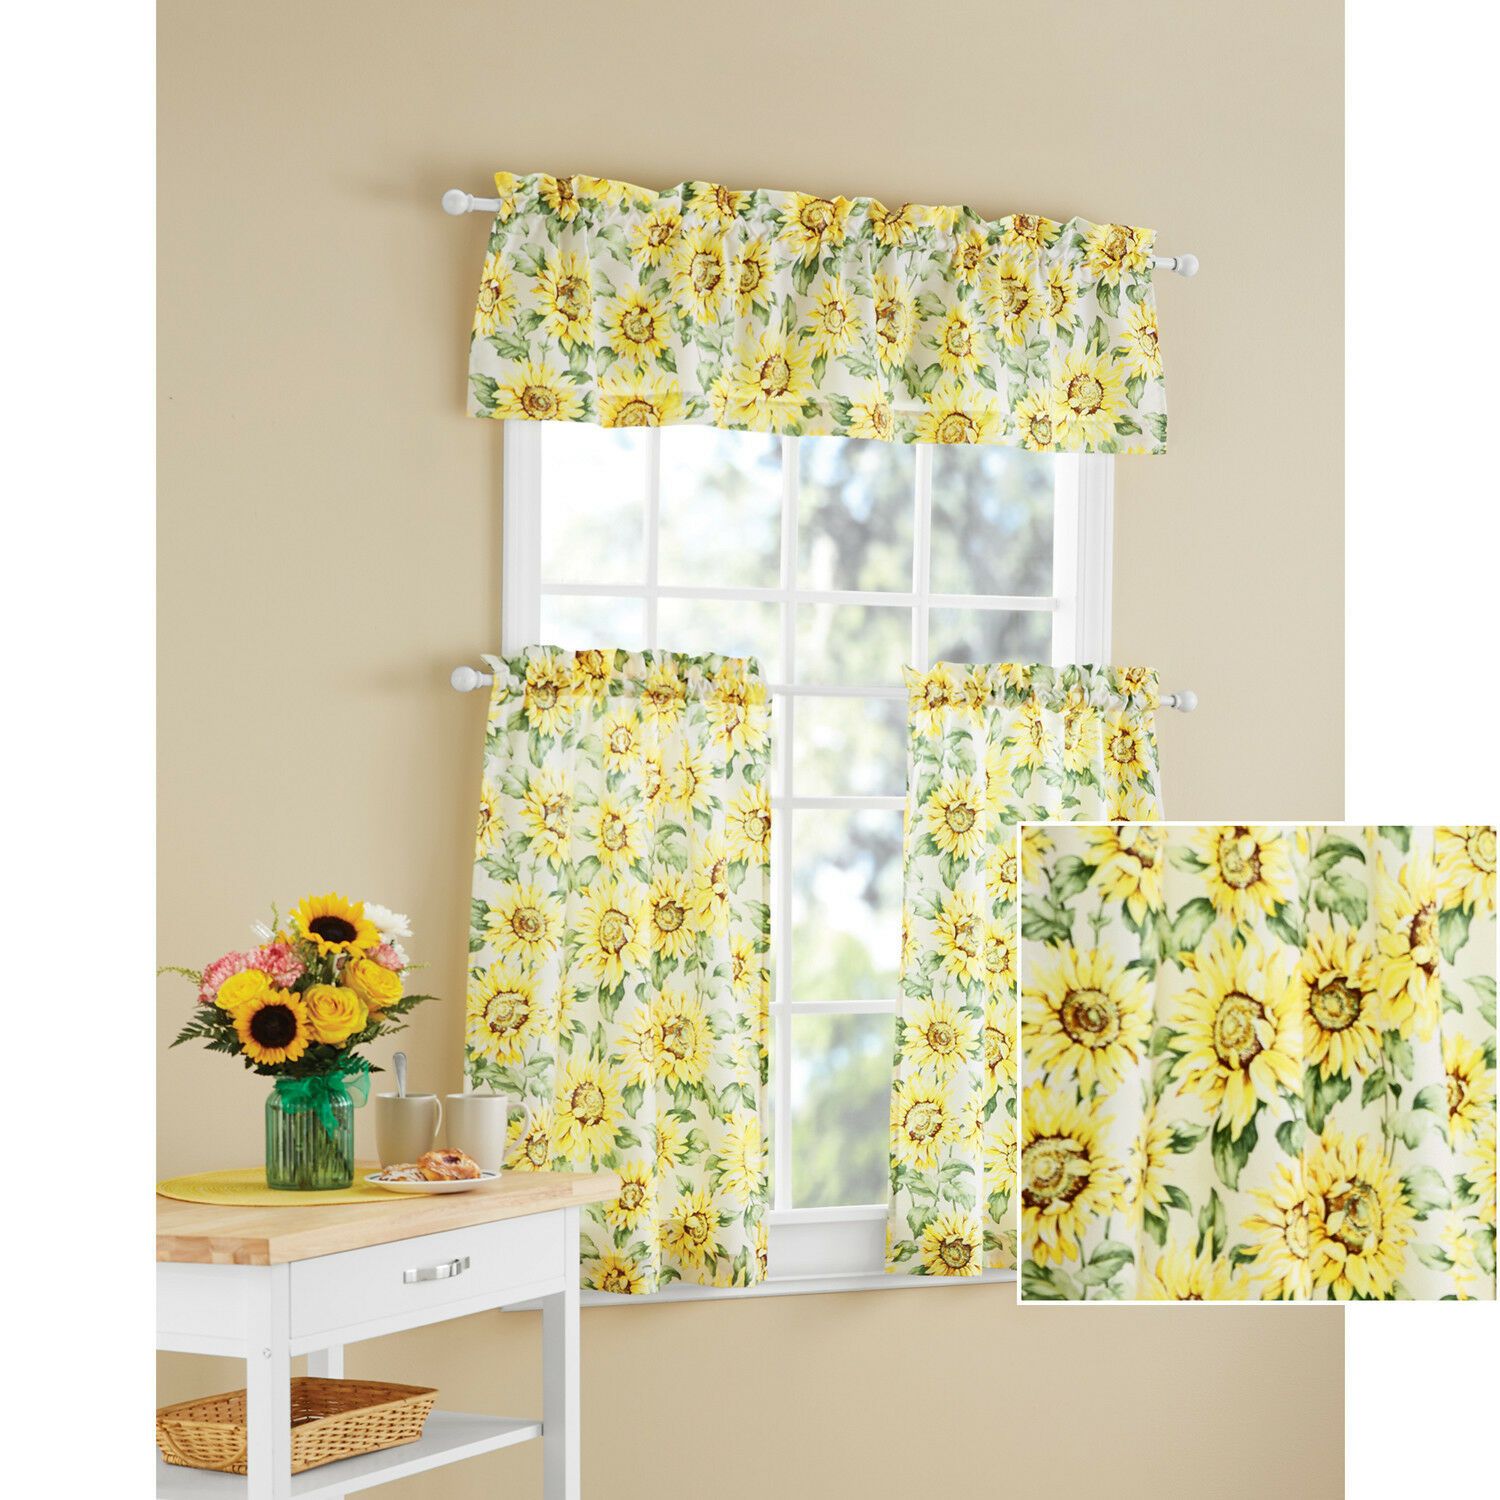 Sunflower 3 Piece Kitchen Curtain Tier And Valance Set Home Decor Room  Window In Lodge Plaid 3 Piece Kitchen Curtain Tier And Valance Sets (View 3 of 20)